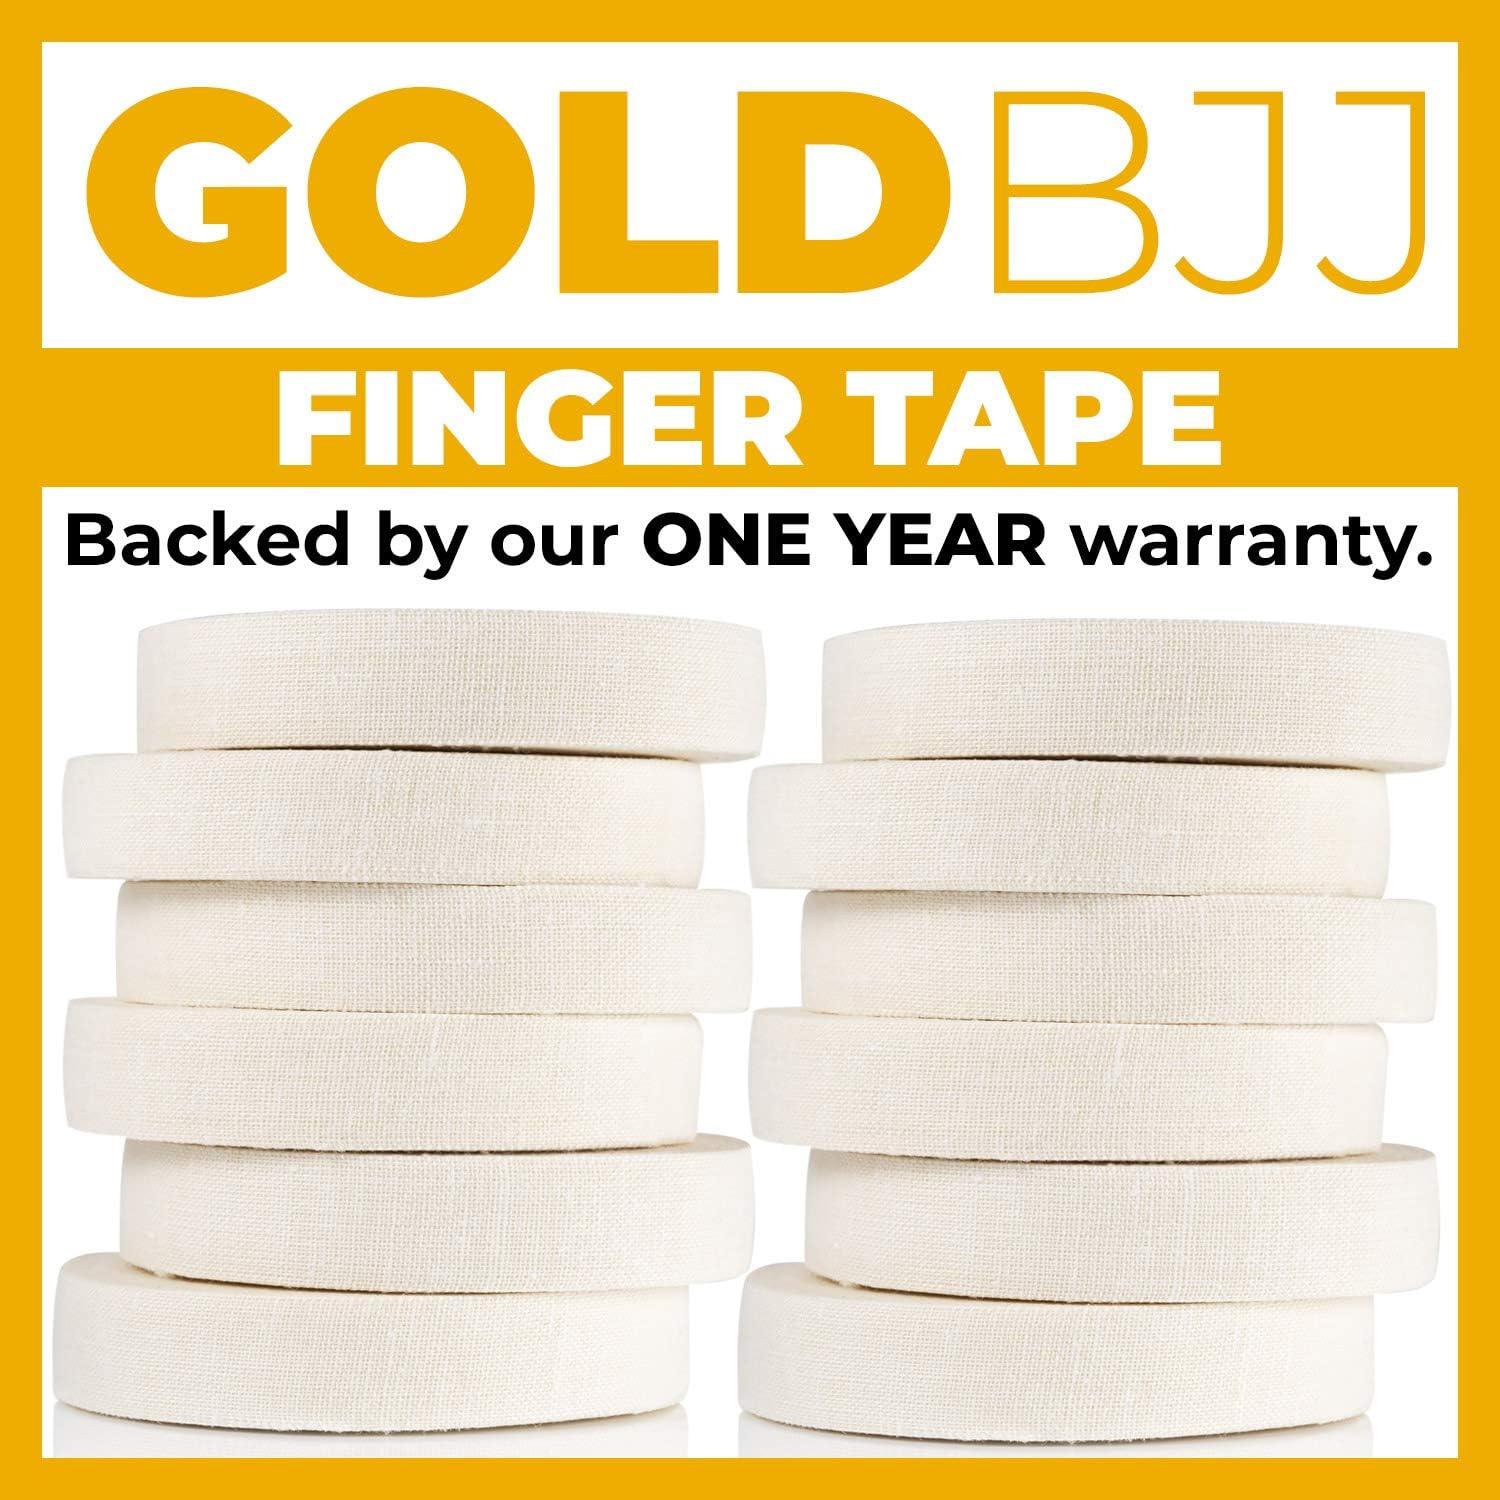 How (And Why) To Tape Your Fingers For Jiu Jitsu - Gold BJJ